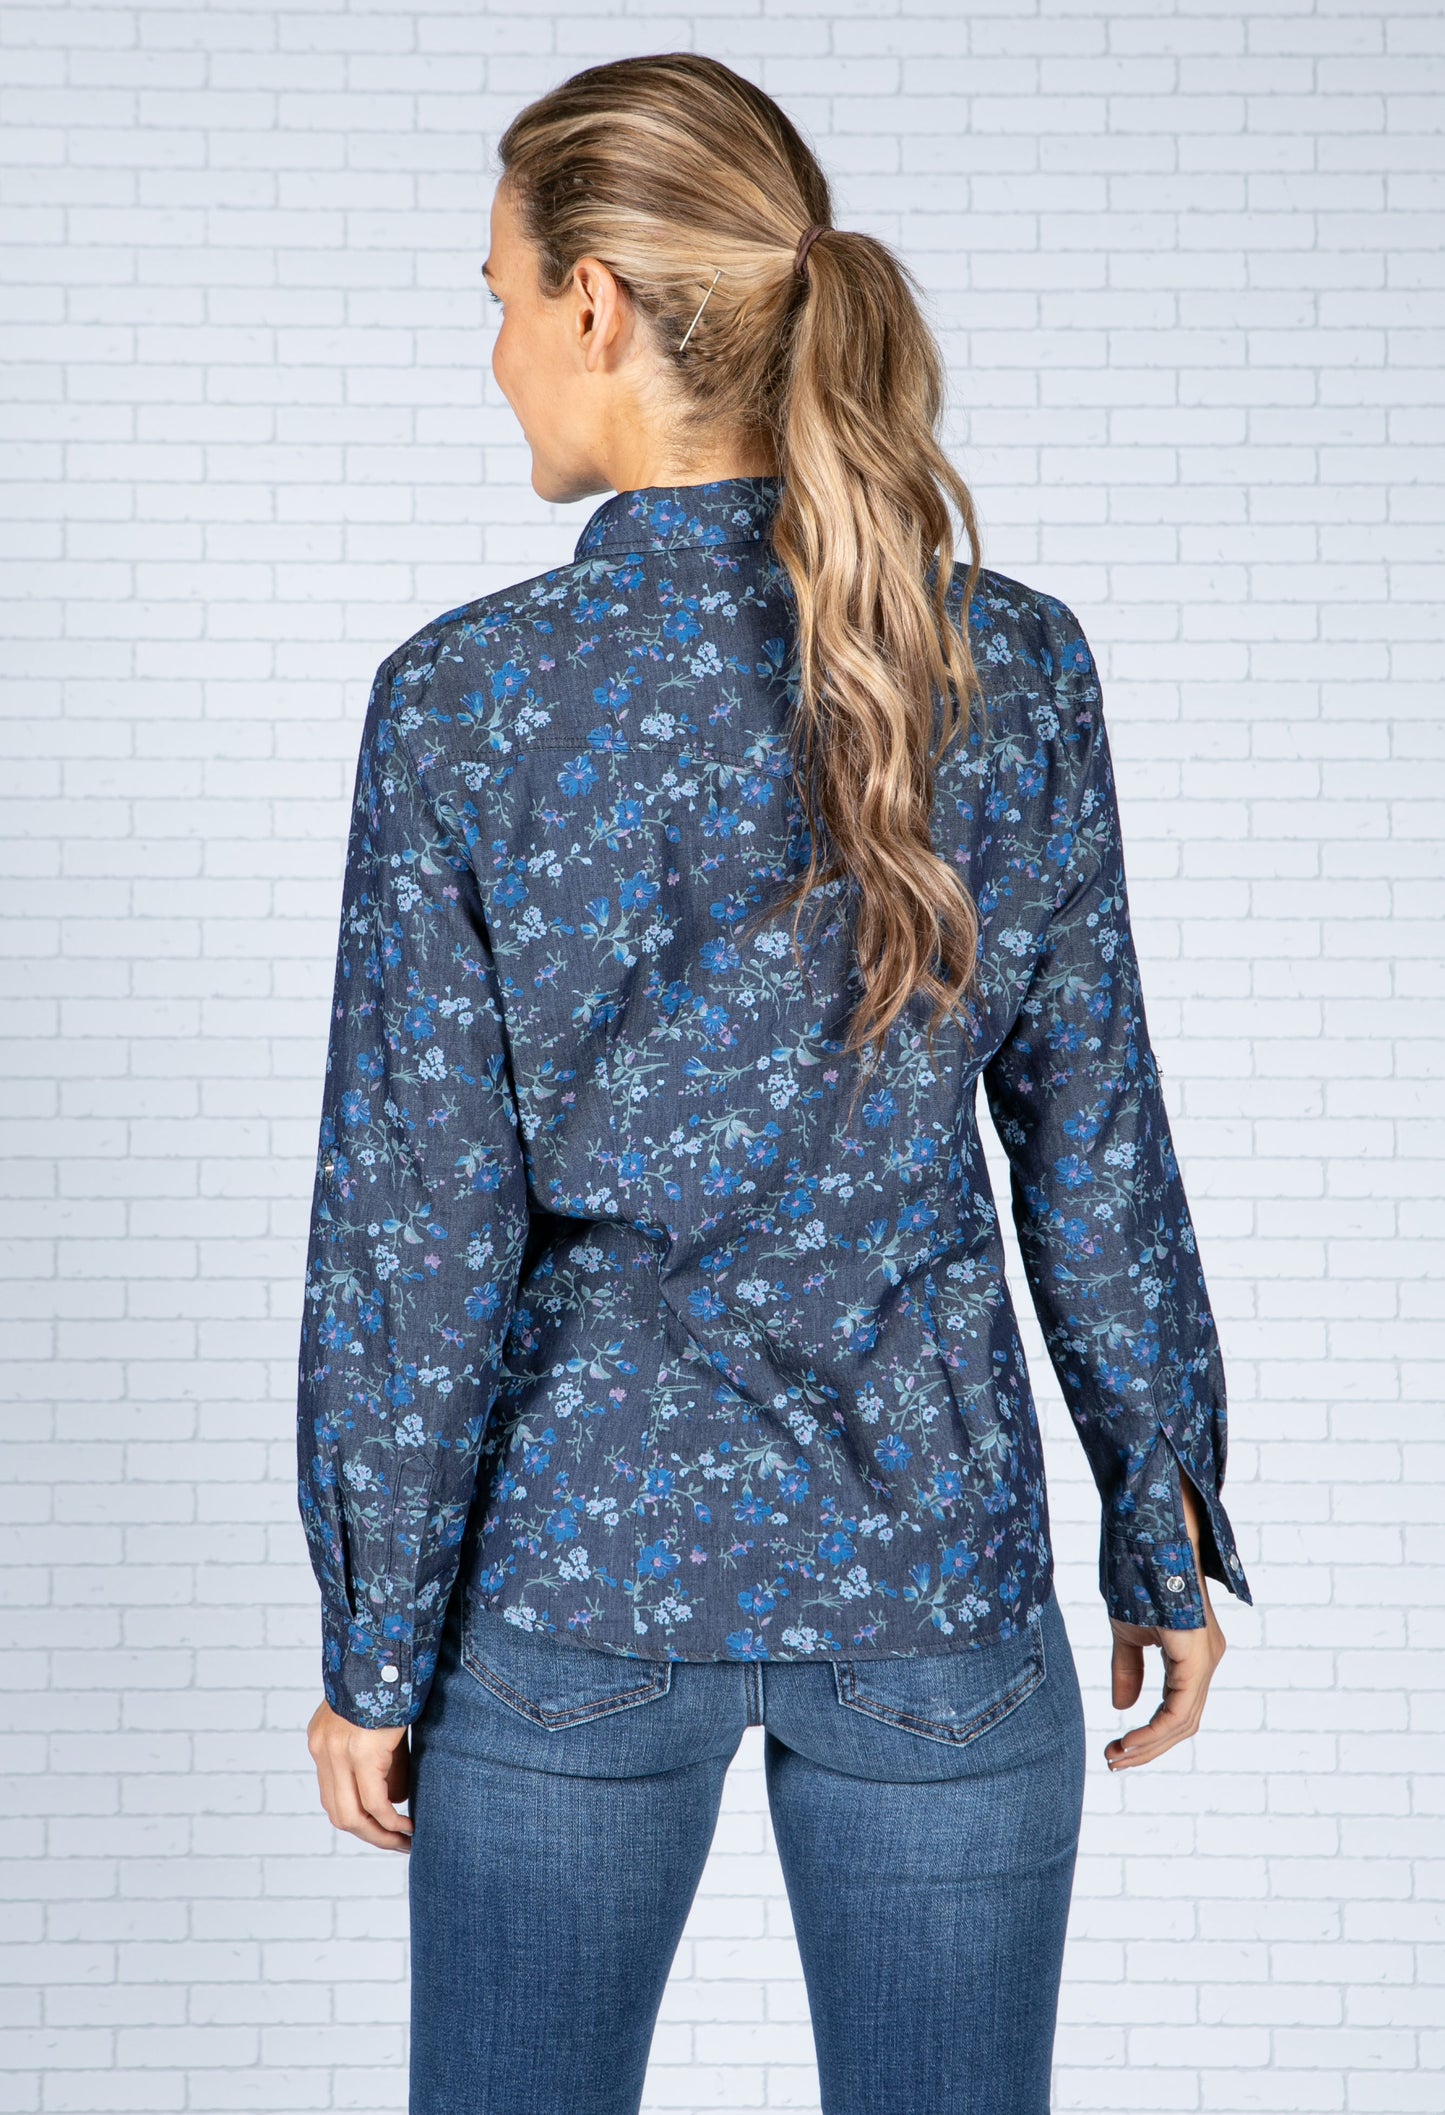 'Forget Me Not' Print Shirt